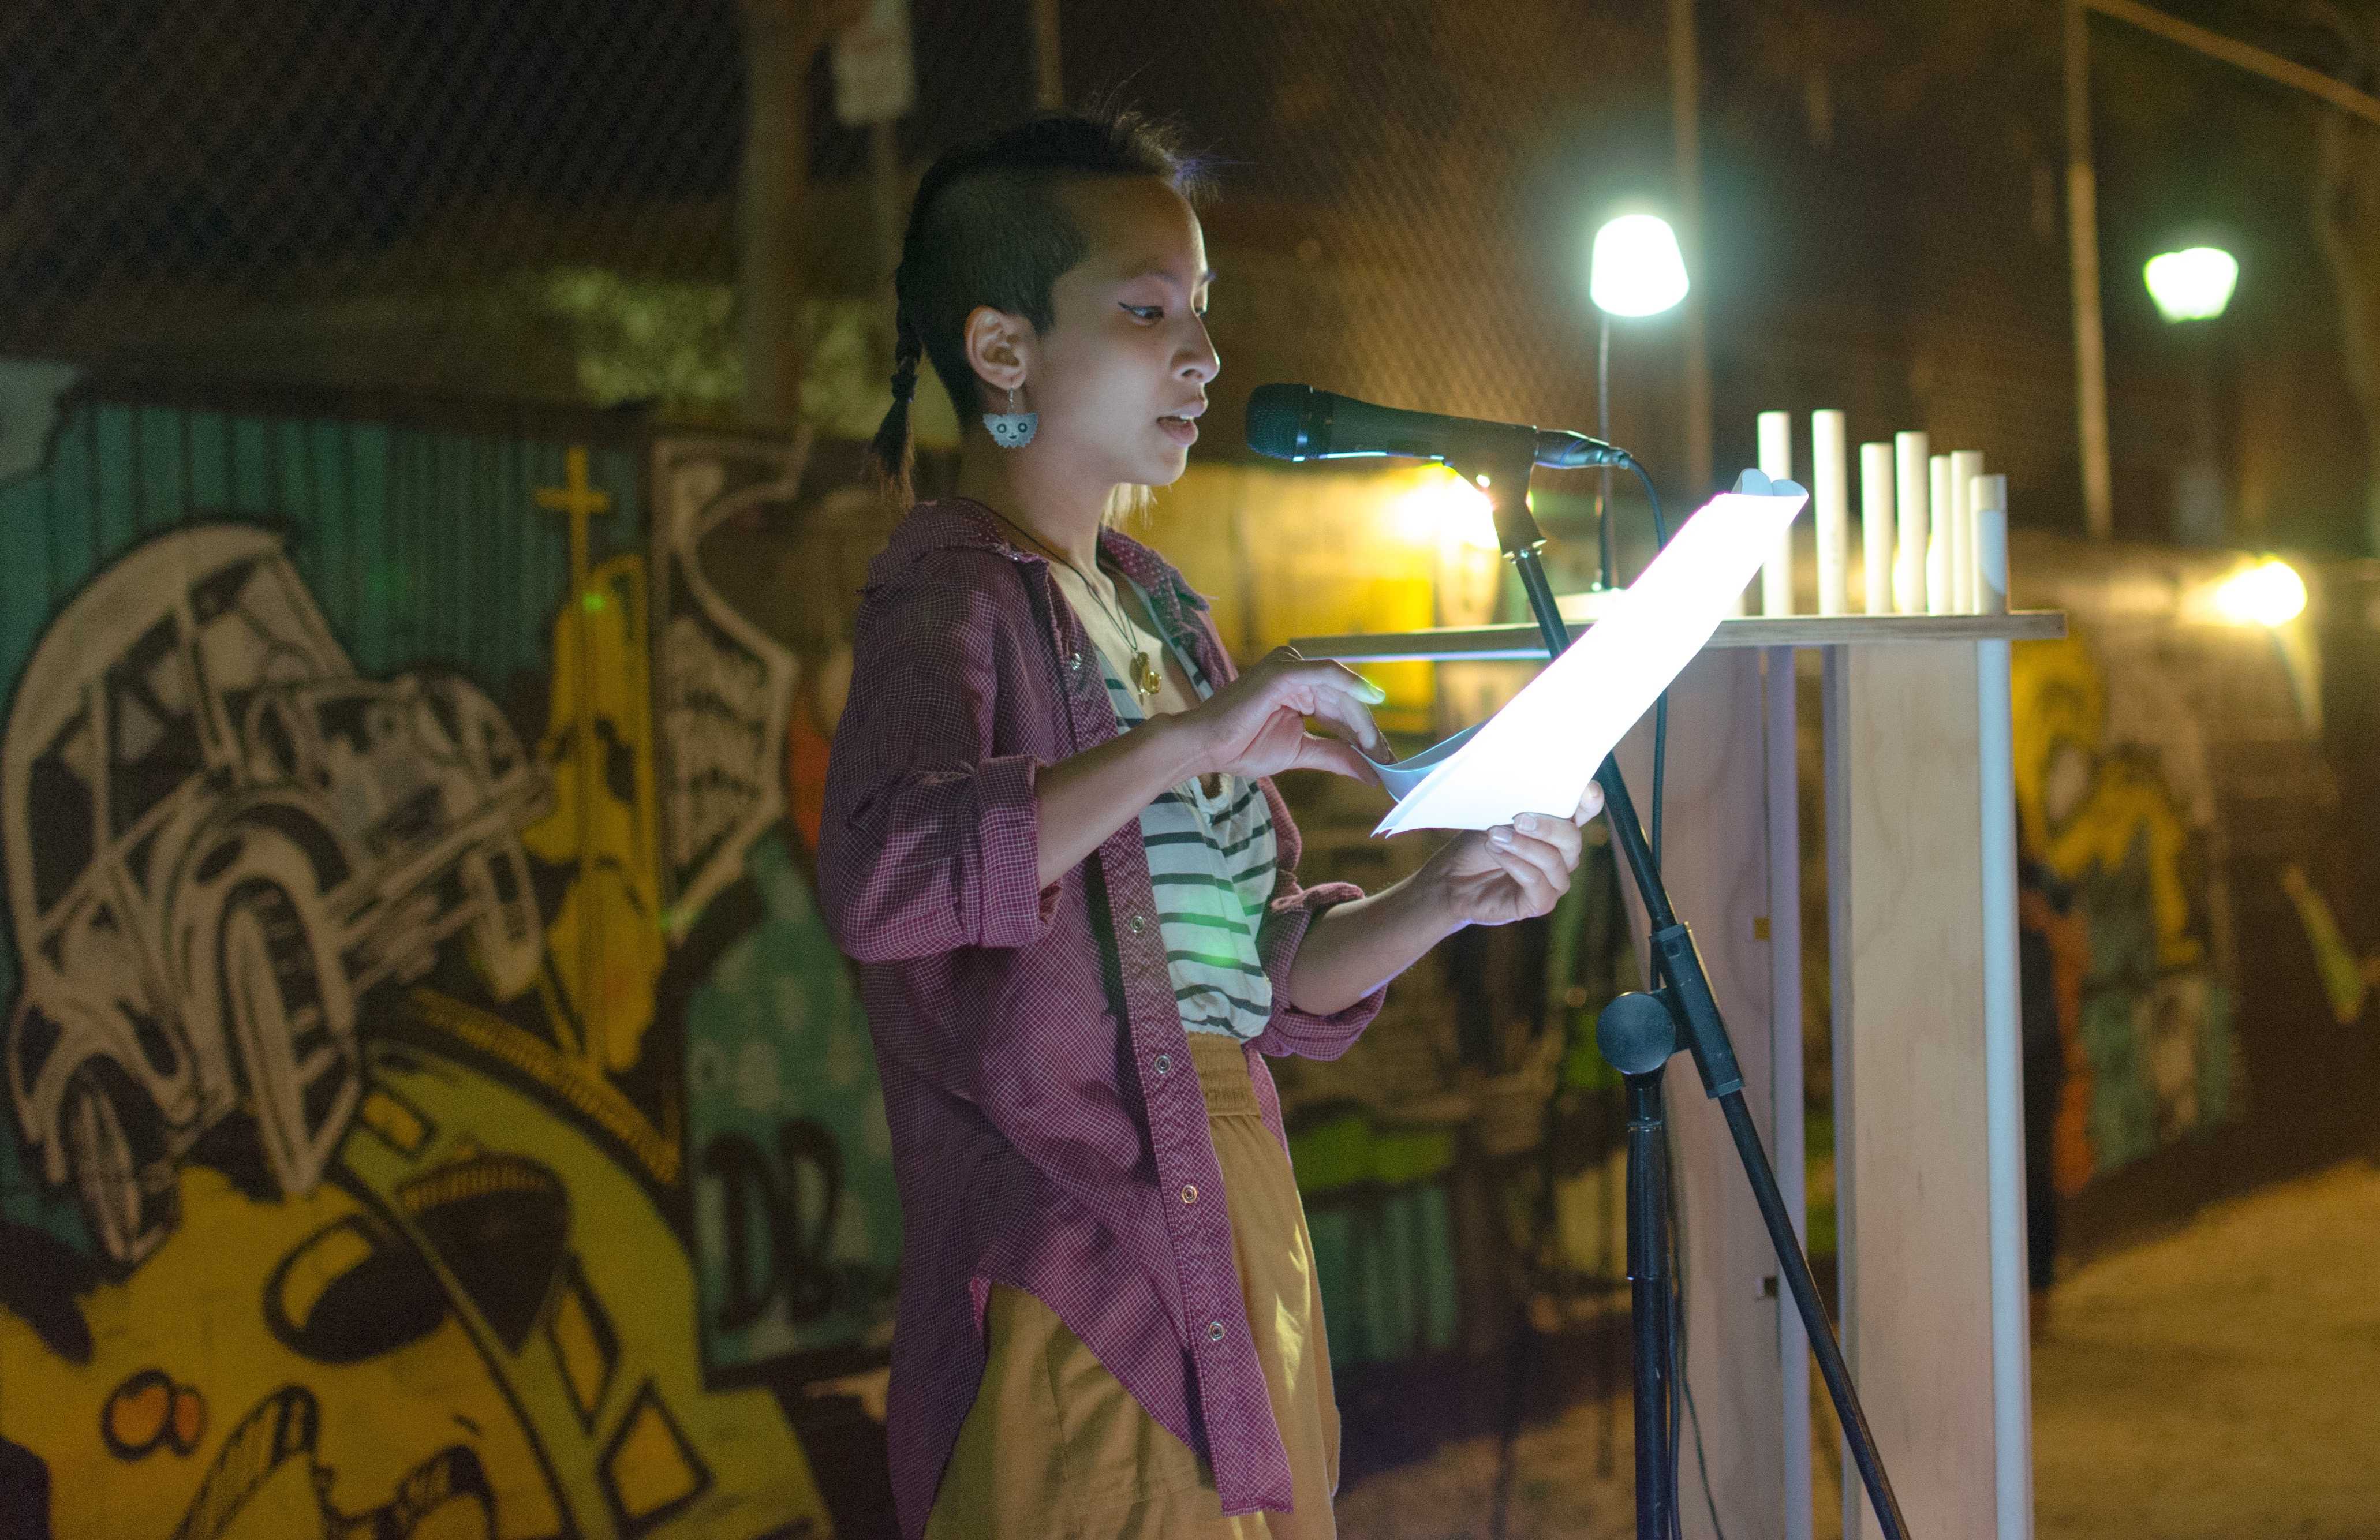 A VAMP participant reads her “taking a stand” inspired monologue during the VAMP showcase on March 26. City Times archive. Photo credit: Richard Lomibao